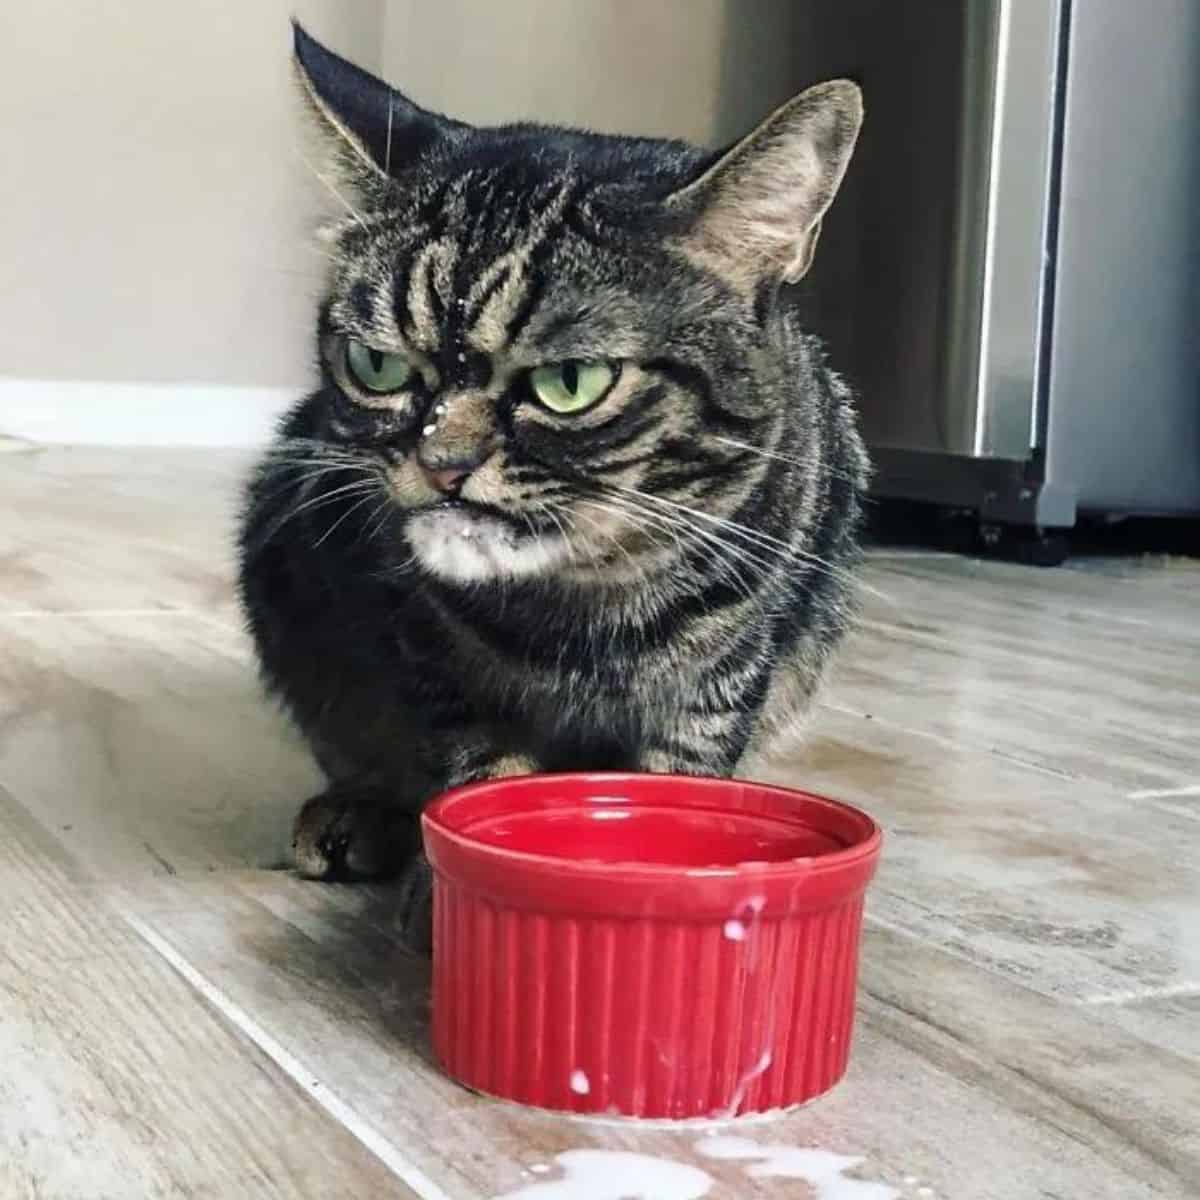 grumpy cat next to a red bowl